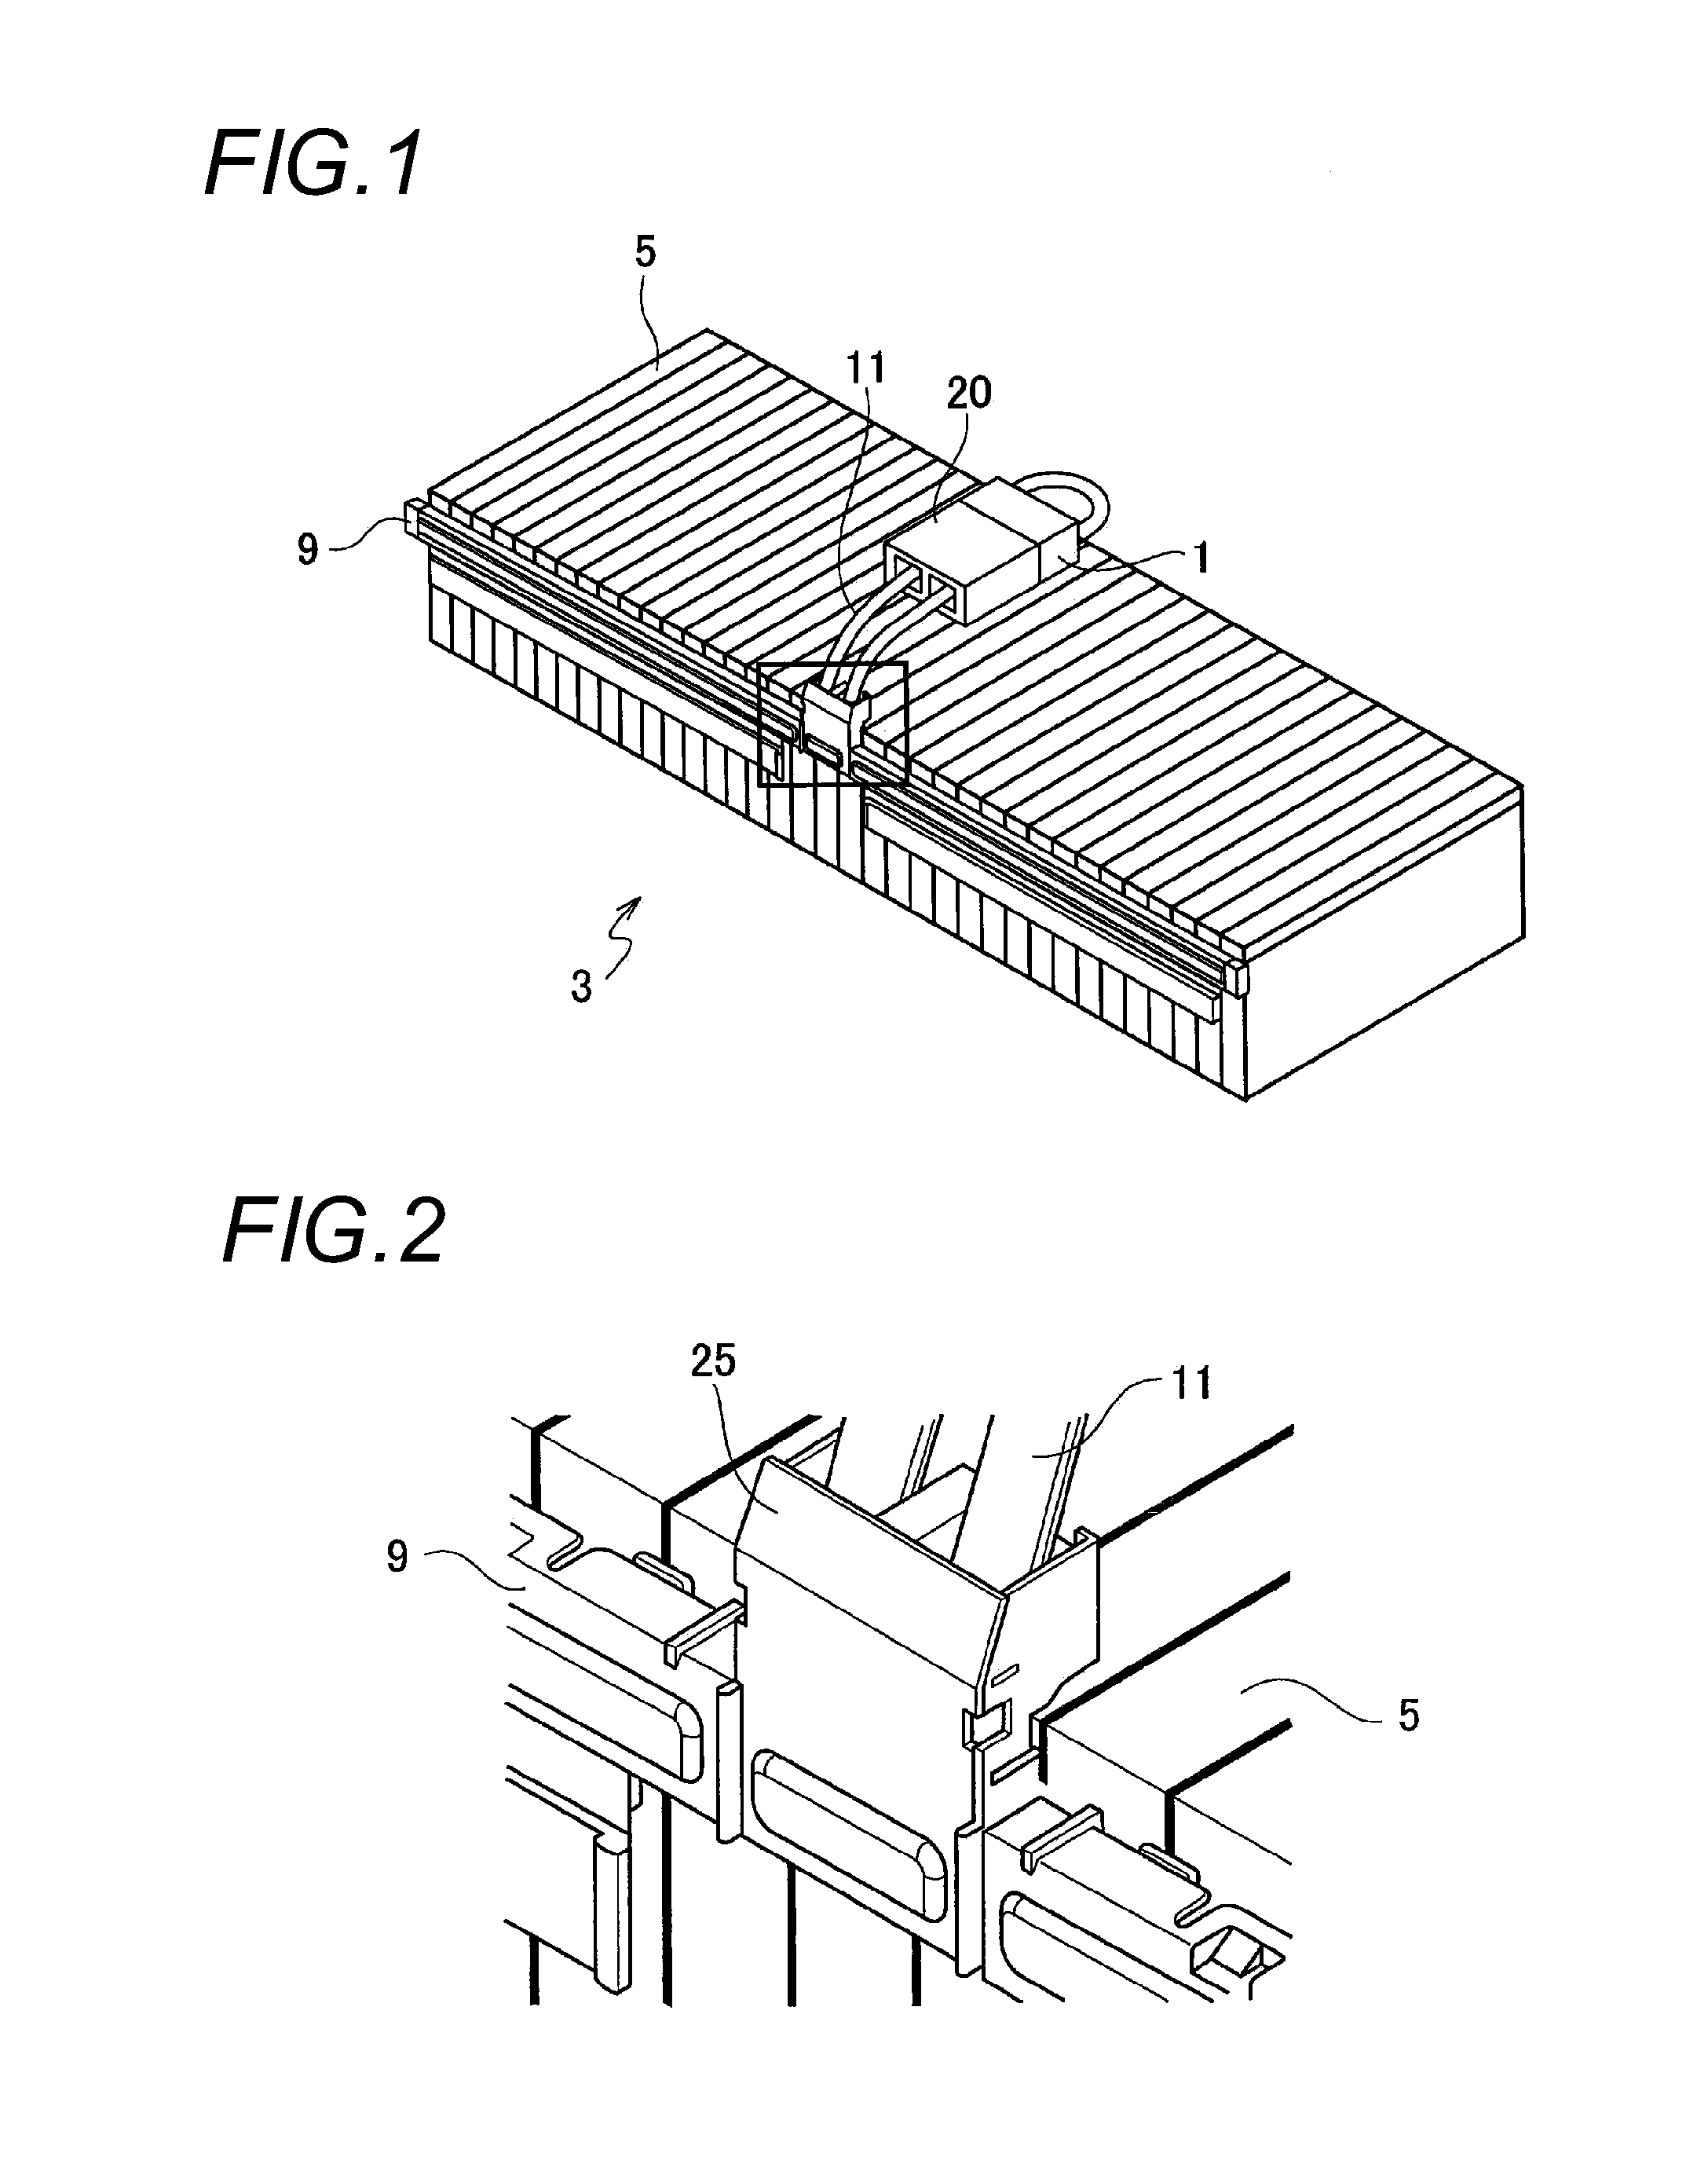 Structure for attaching service plug